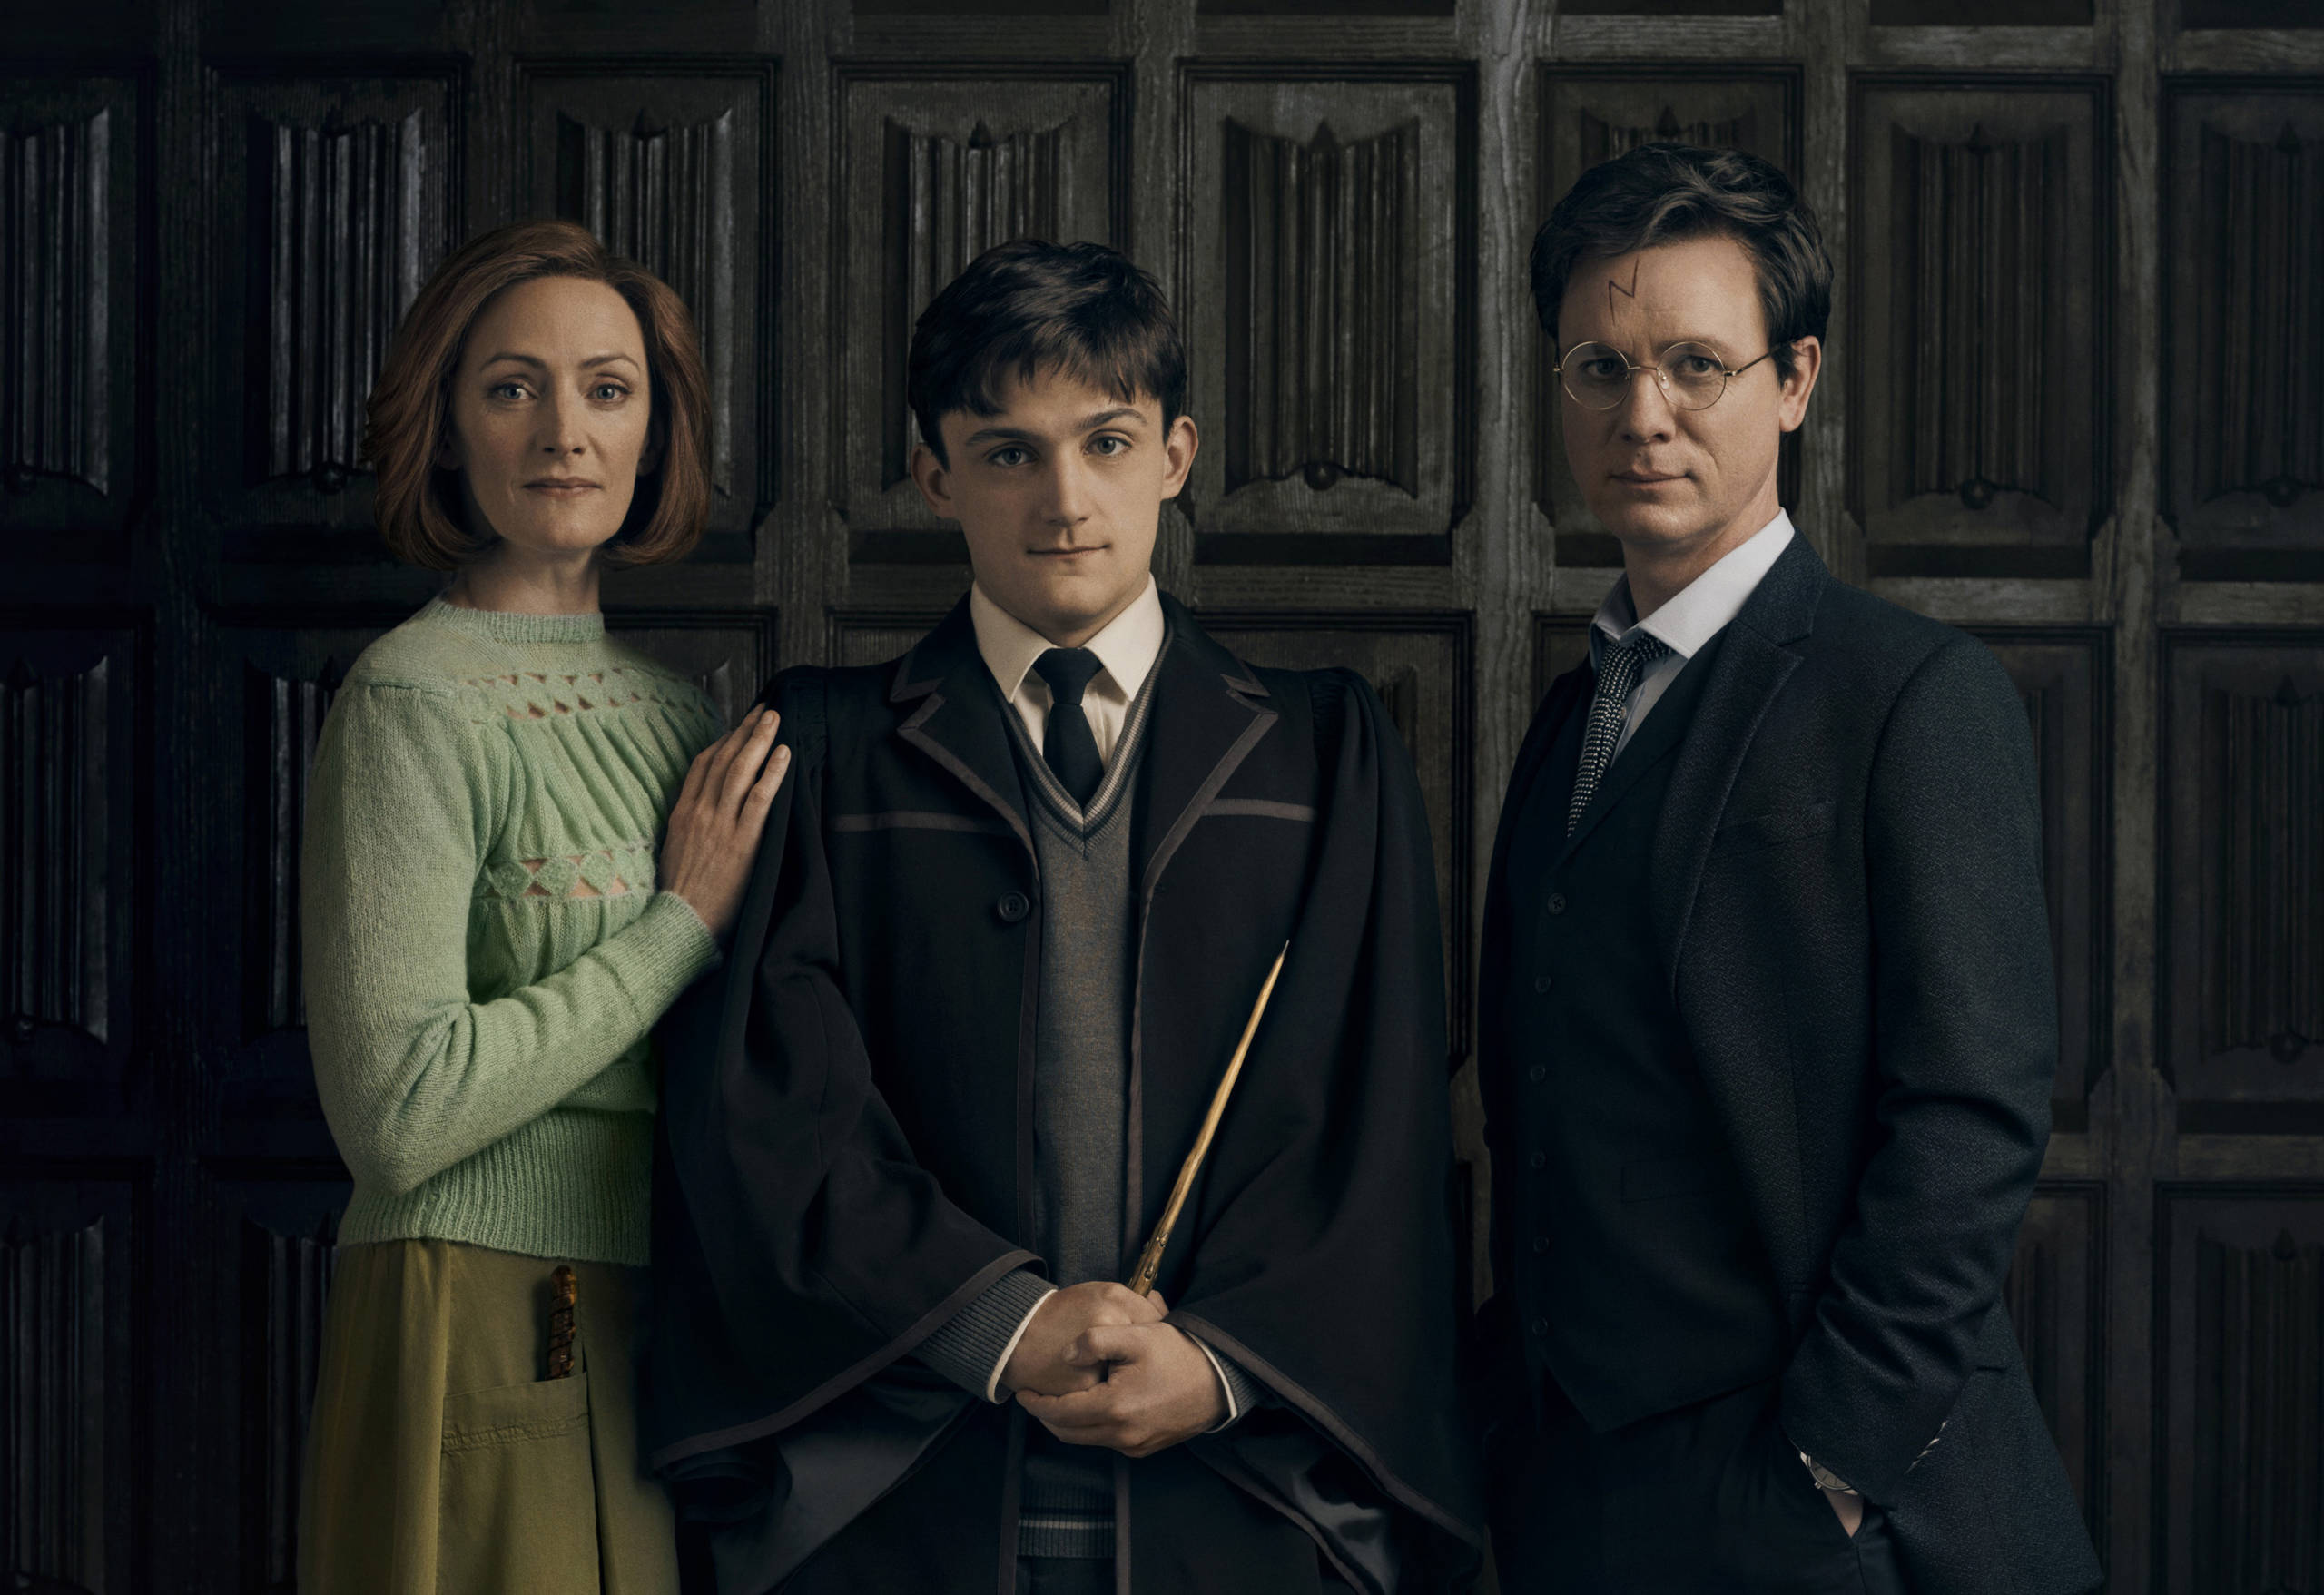 Ginny (Susie Trayling) Albus (Joe Idris-Roberts) and Harry (Jamie Ballard) join the third West End cast for Cursed Child. Image by Charlie Gray 